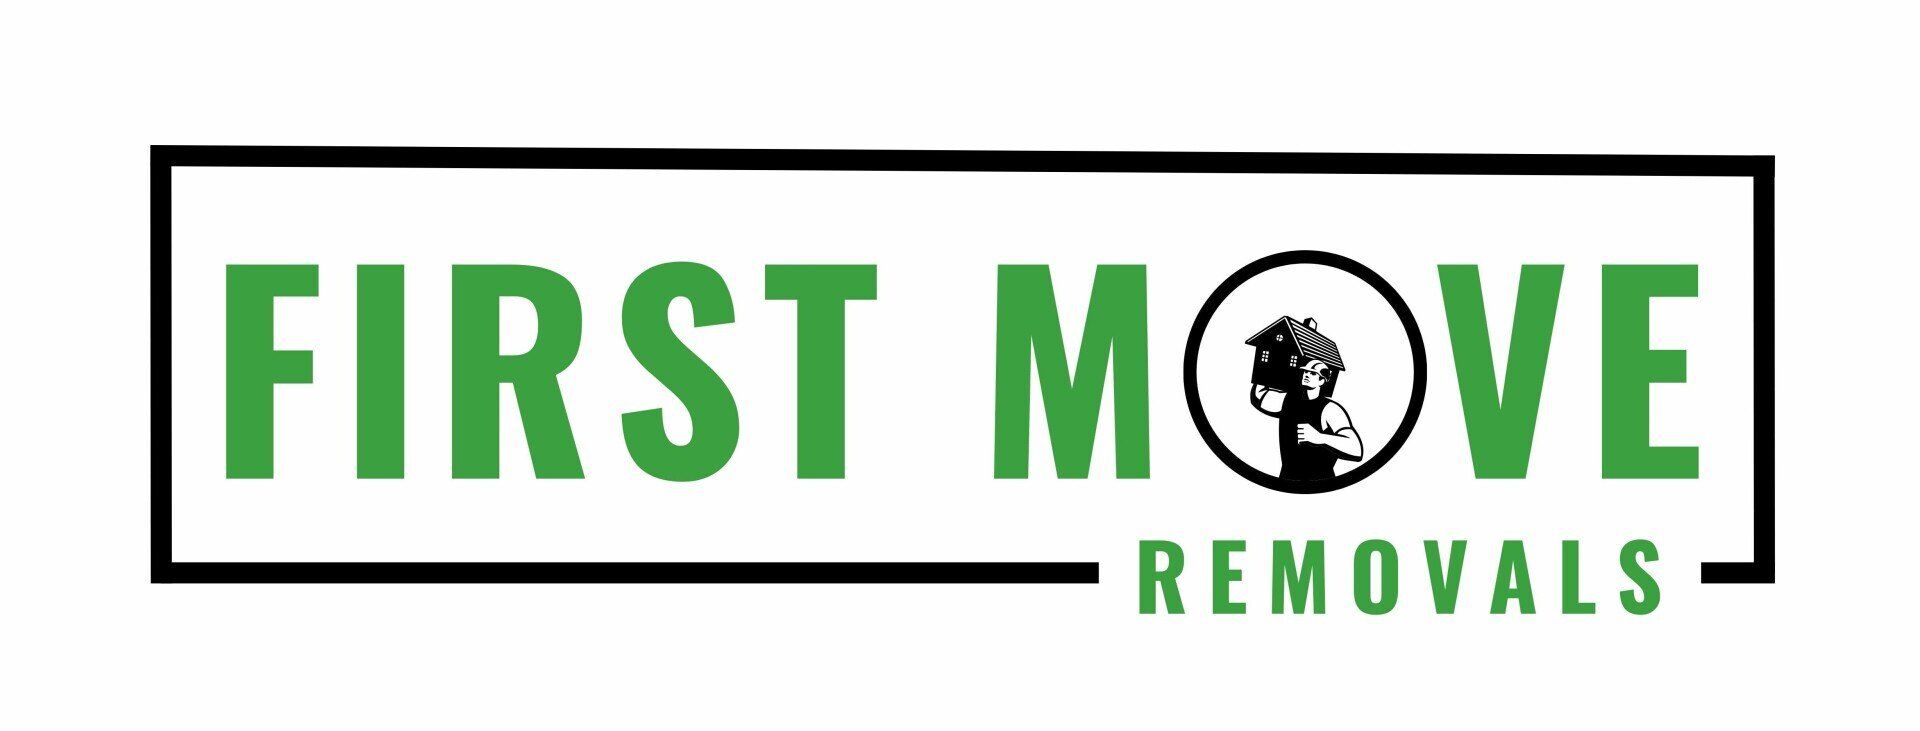 First Move Removals —Professional Removalists on the Sunshine Coast